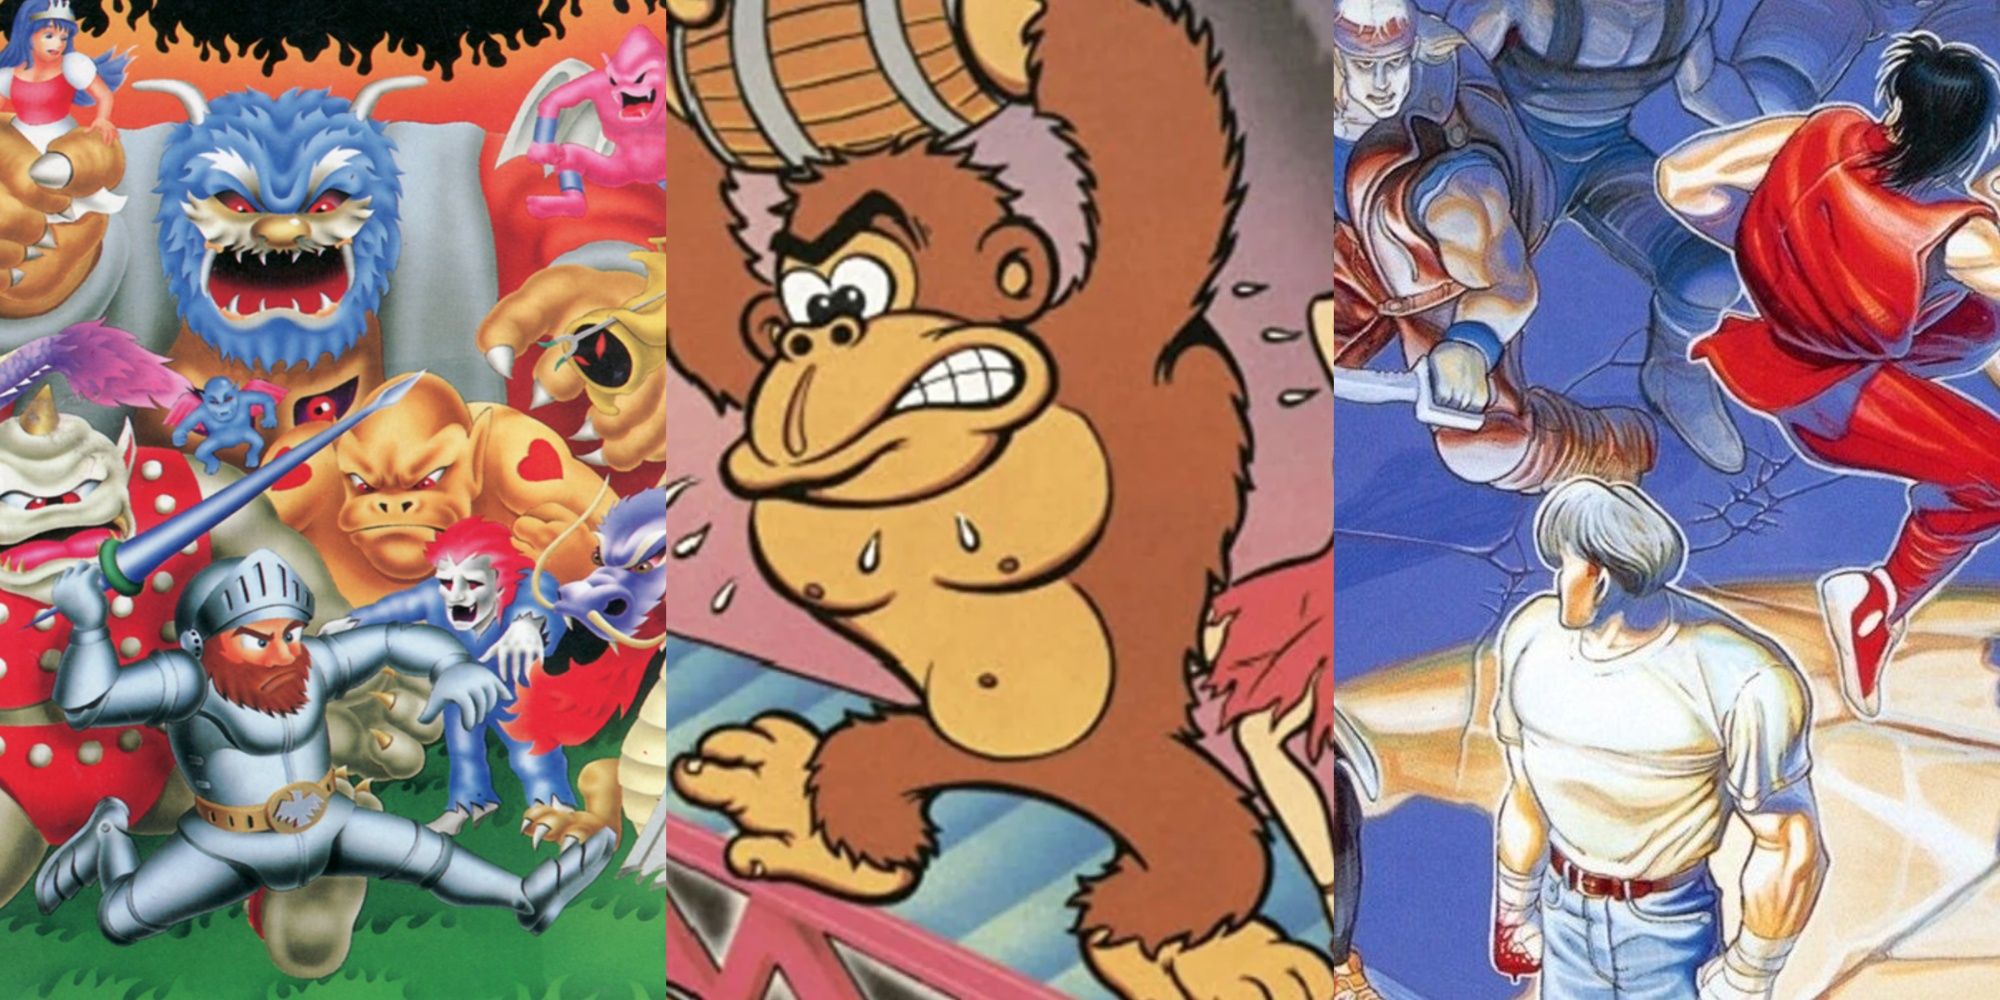 Key art for Ghosts 'n Goblins, Donkey Kong, and Final Fight.